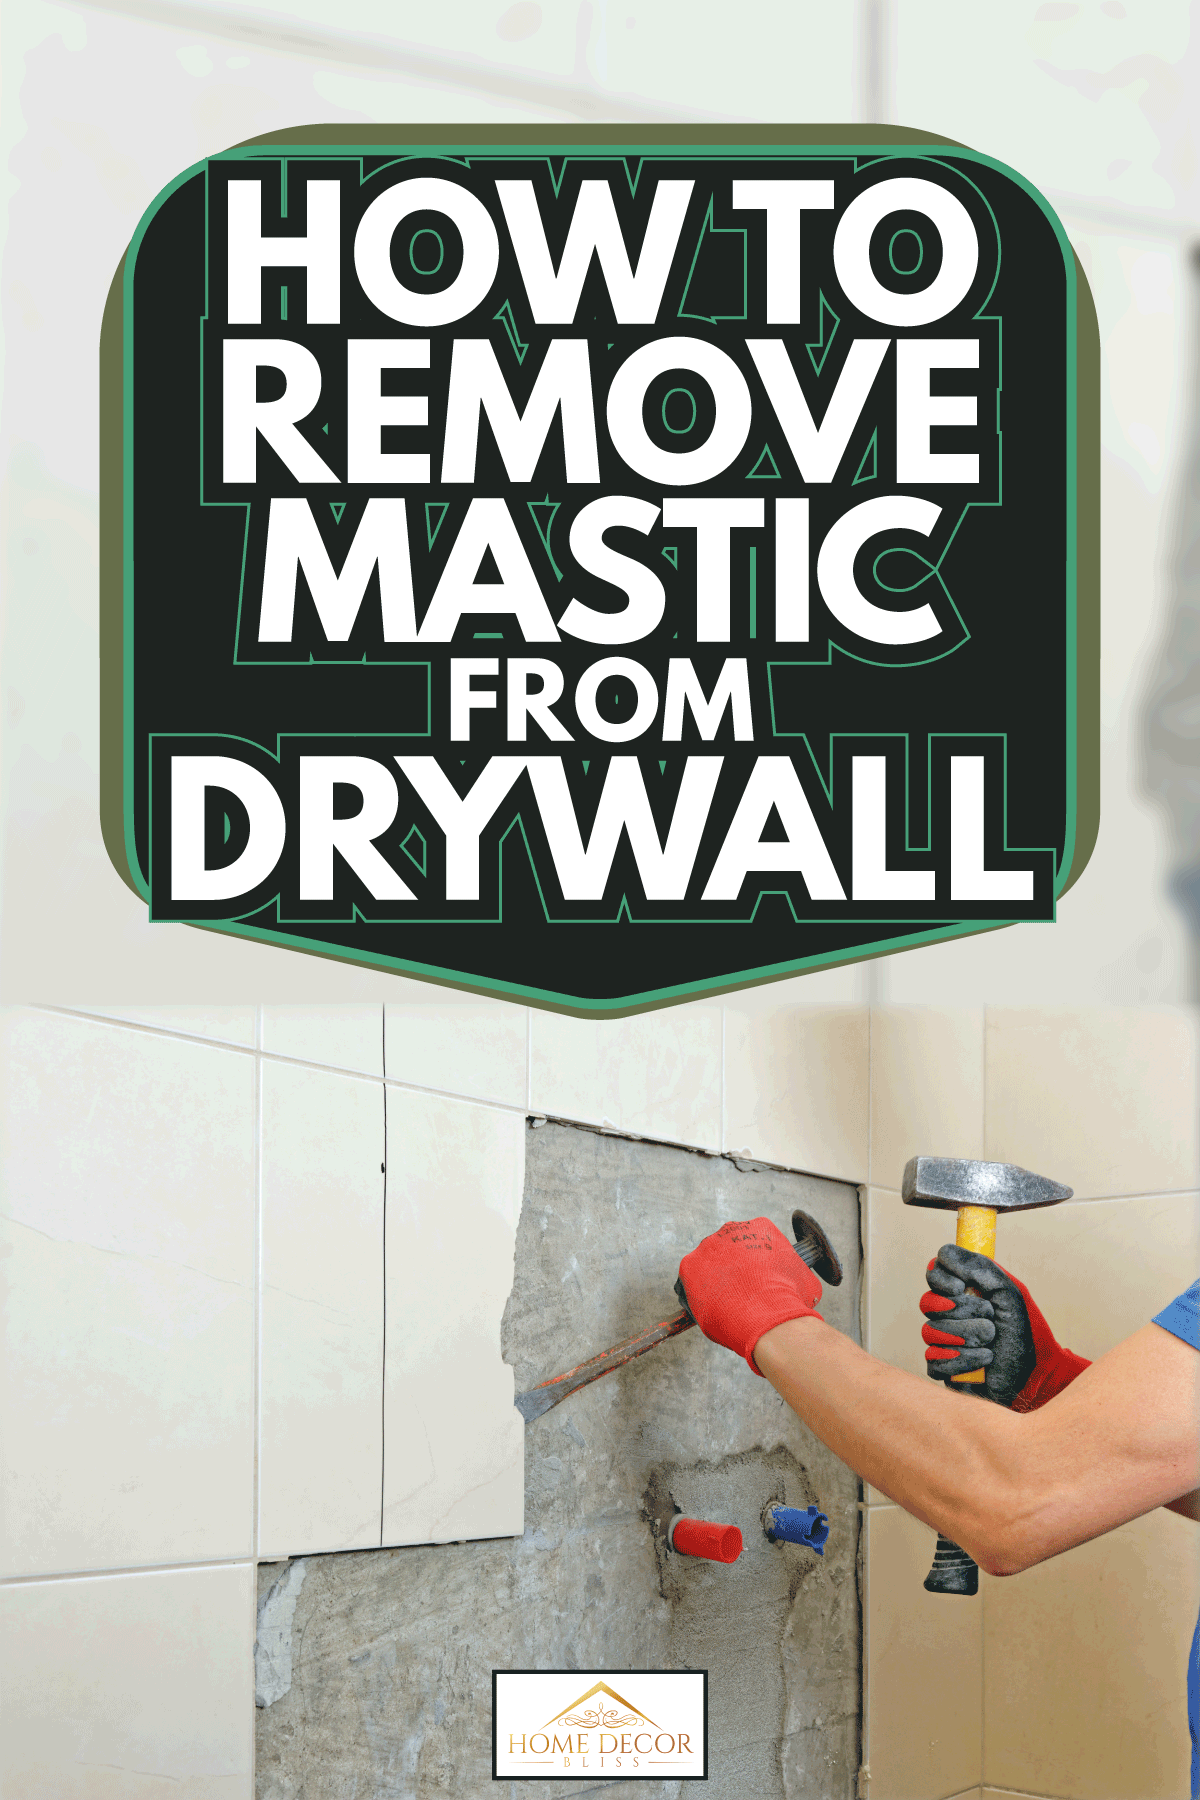 Replacement of old tiles, worker with hammer and chisel. How To Remove Mastic From Drywall